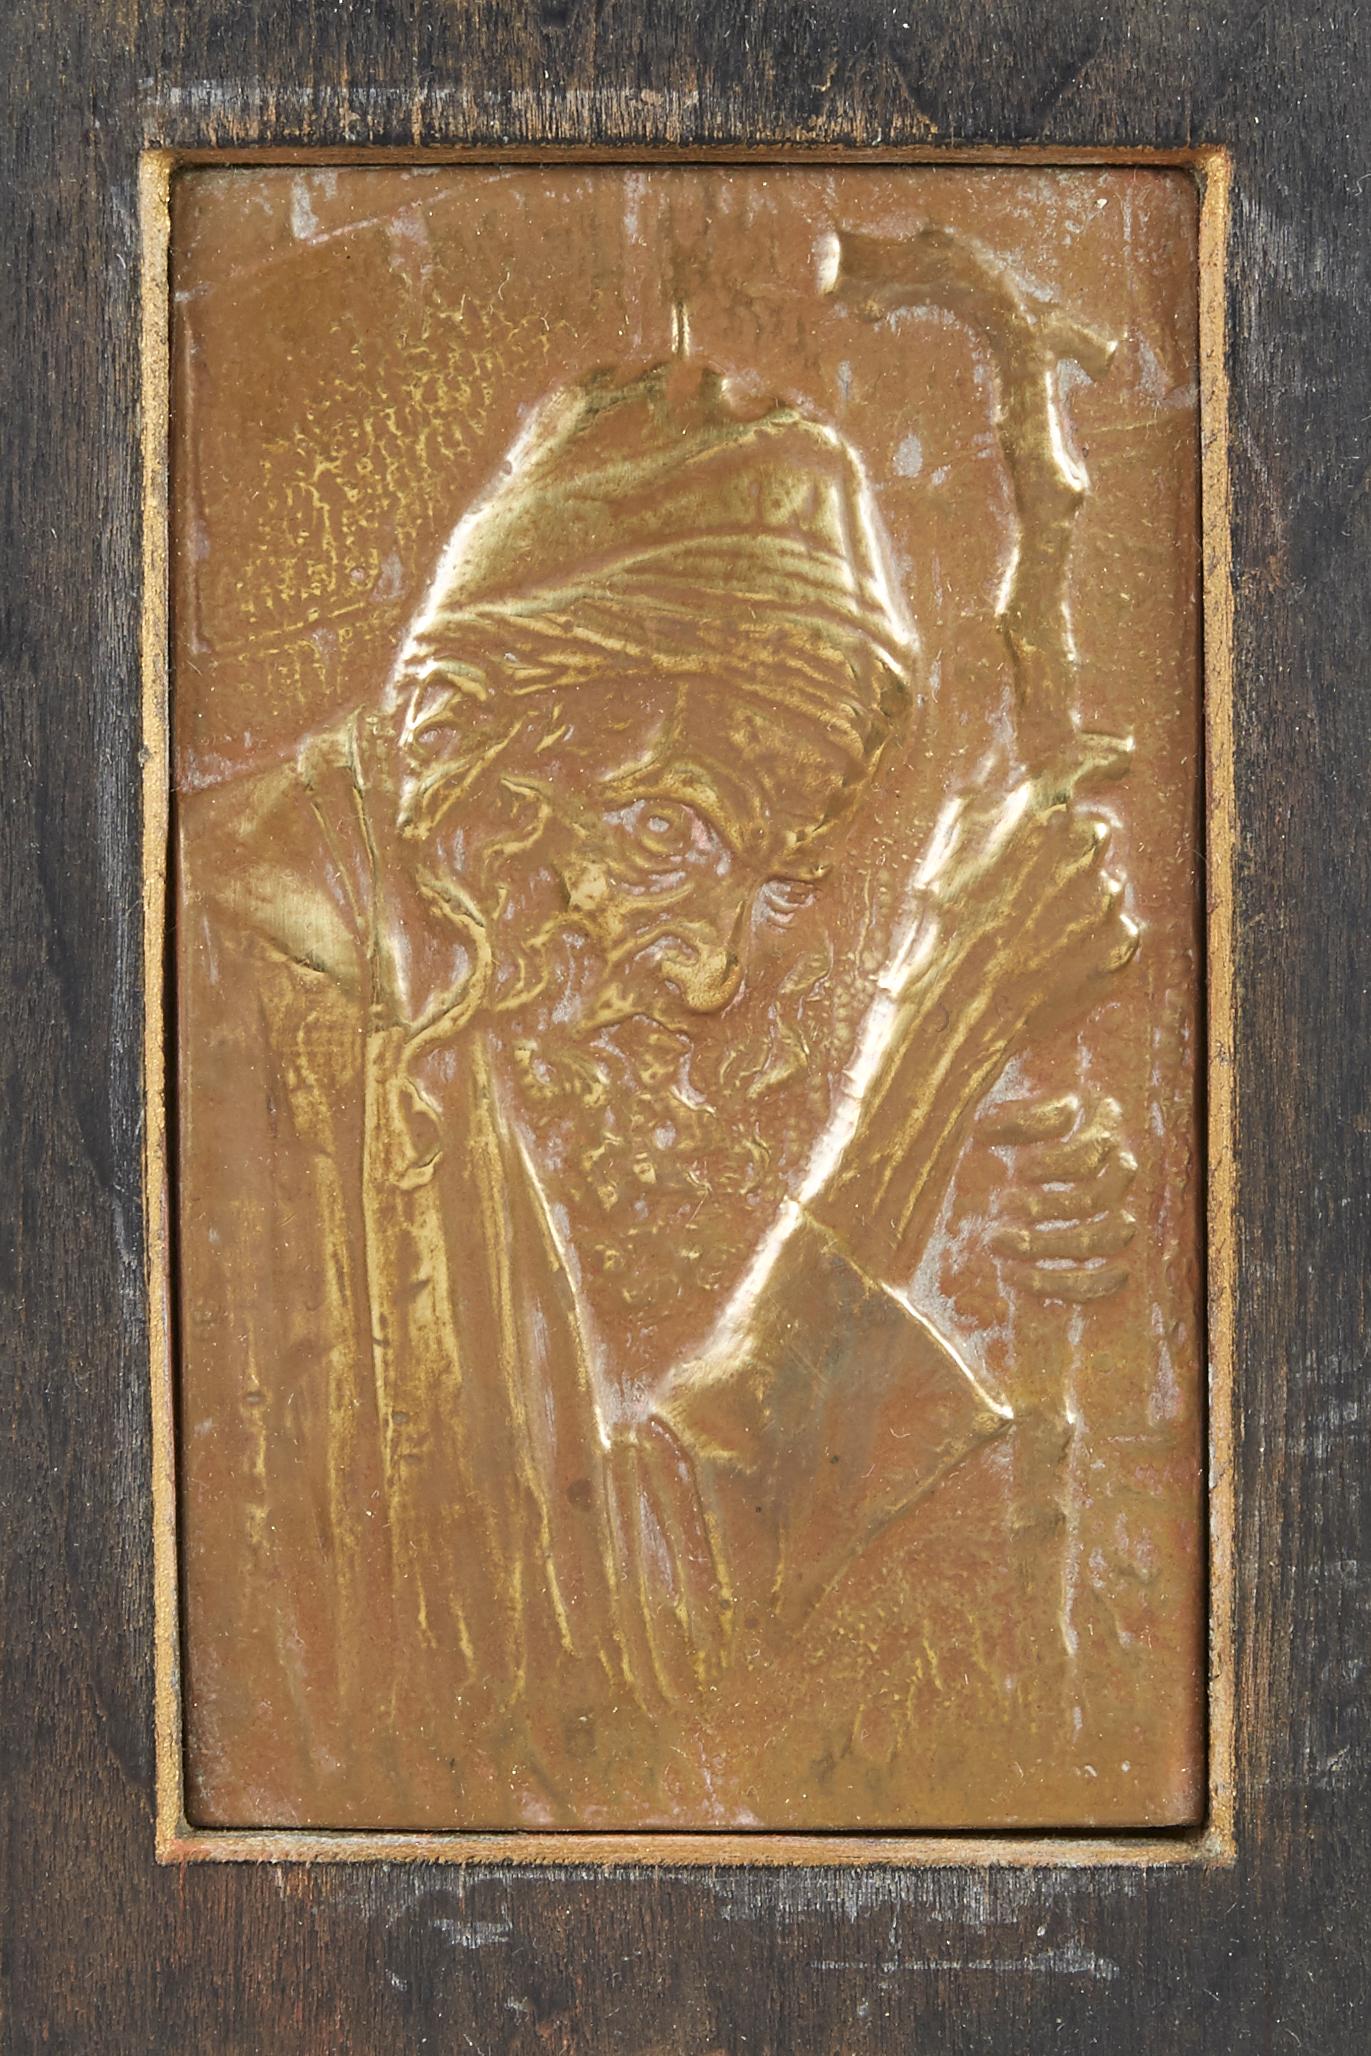 Bezalel brass plaque depicting a Jewish elder next to the Western Wall, made in Jerusalem, circa 1920, bearing a small metal label engraved 